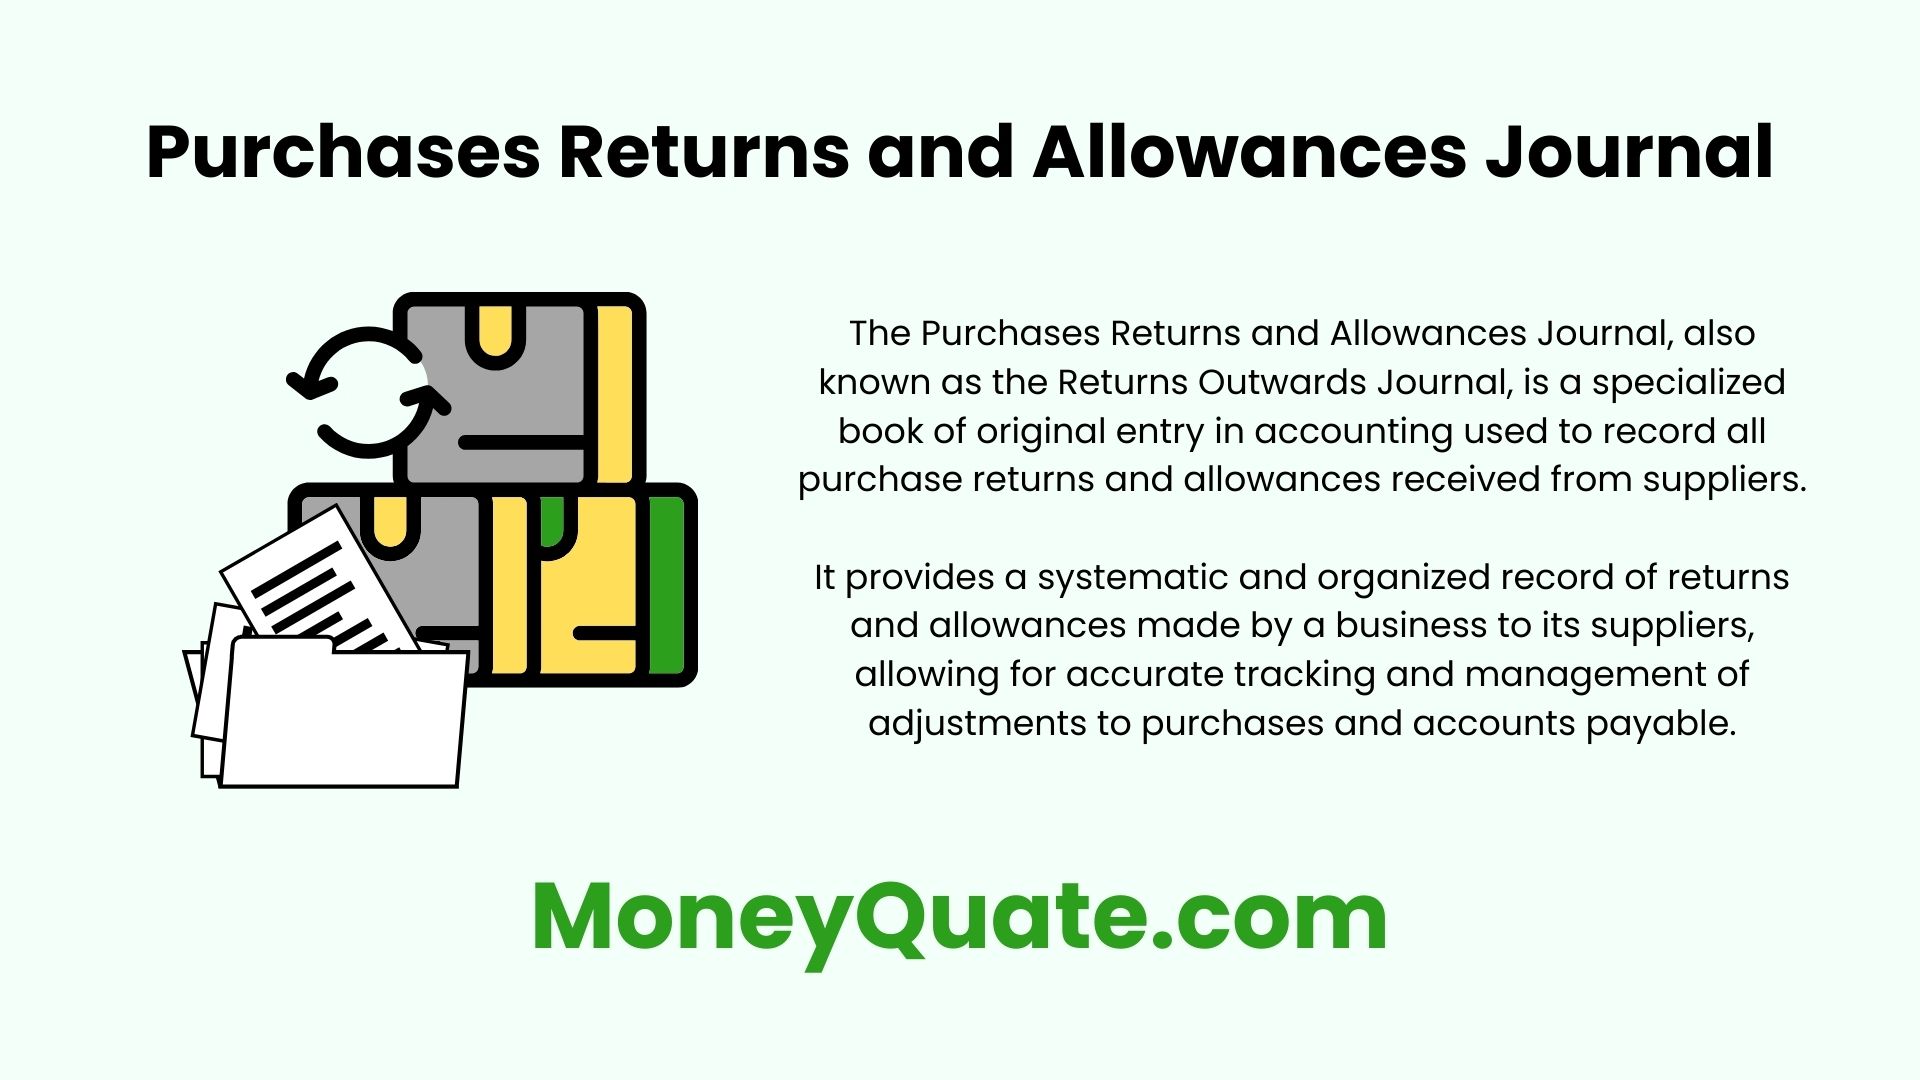 What are the Purchases Returns and Allowances Journal?